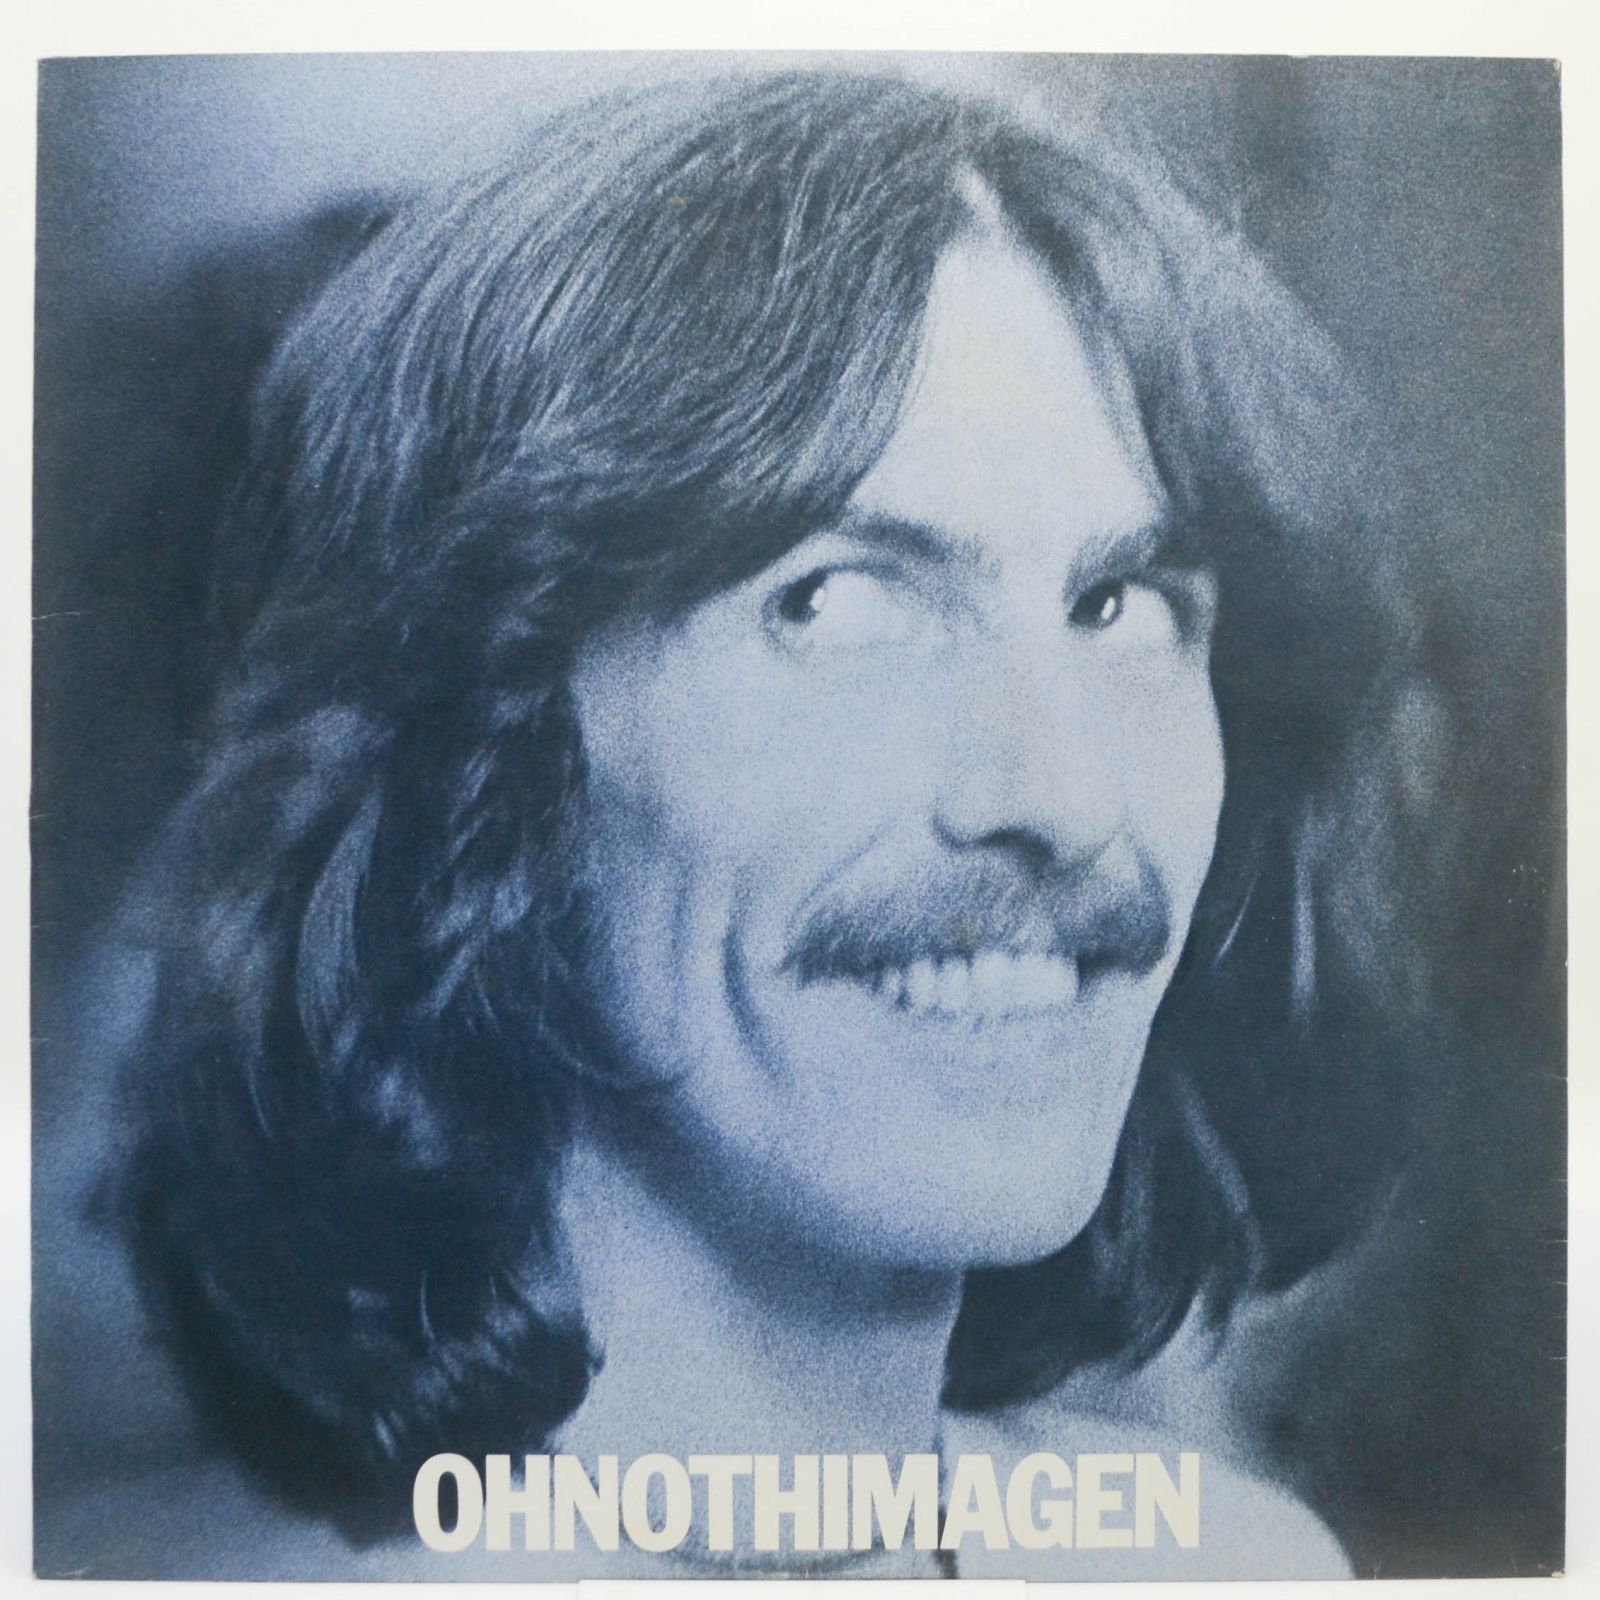 George Harrison — Extra Texture (Read All About It), 1975